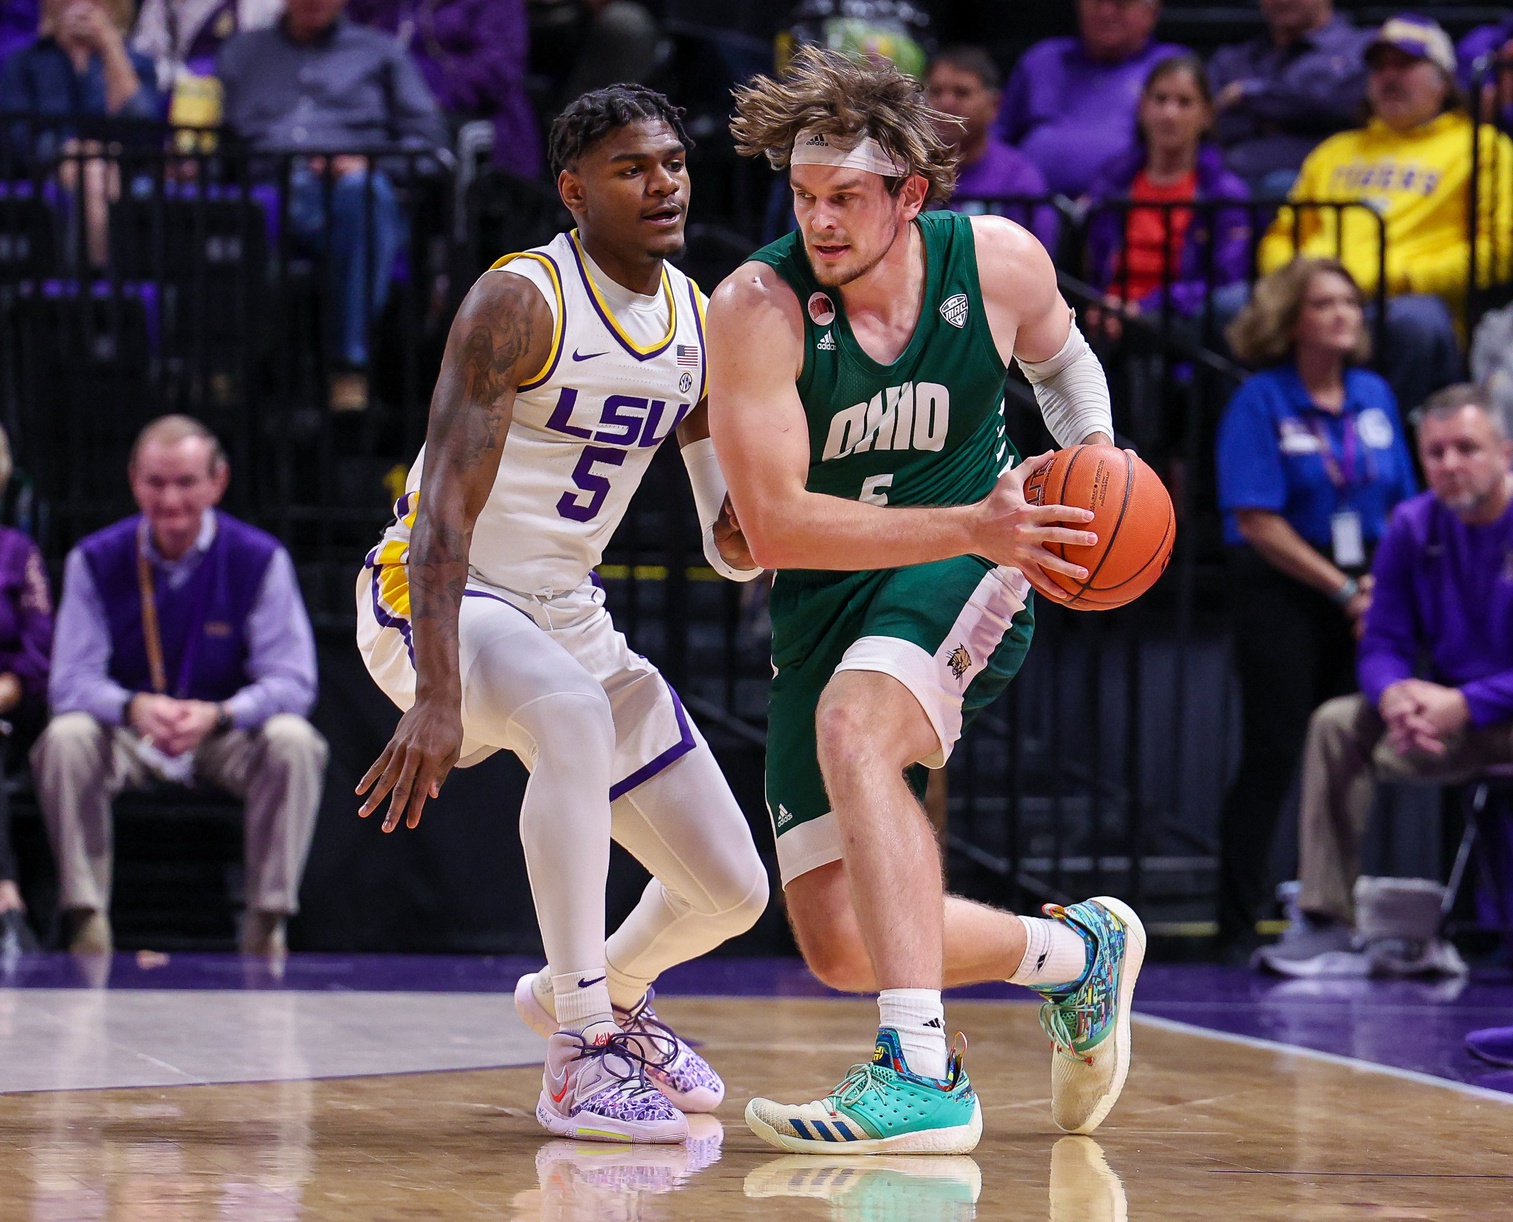 Illinois State Redbirds vs LSU Tigers Prediction, 11/21/2022 College Basketball Picks, Best Bets & Odds